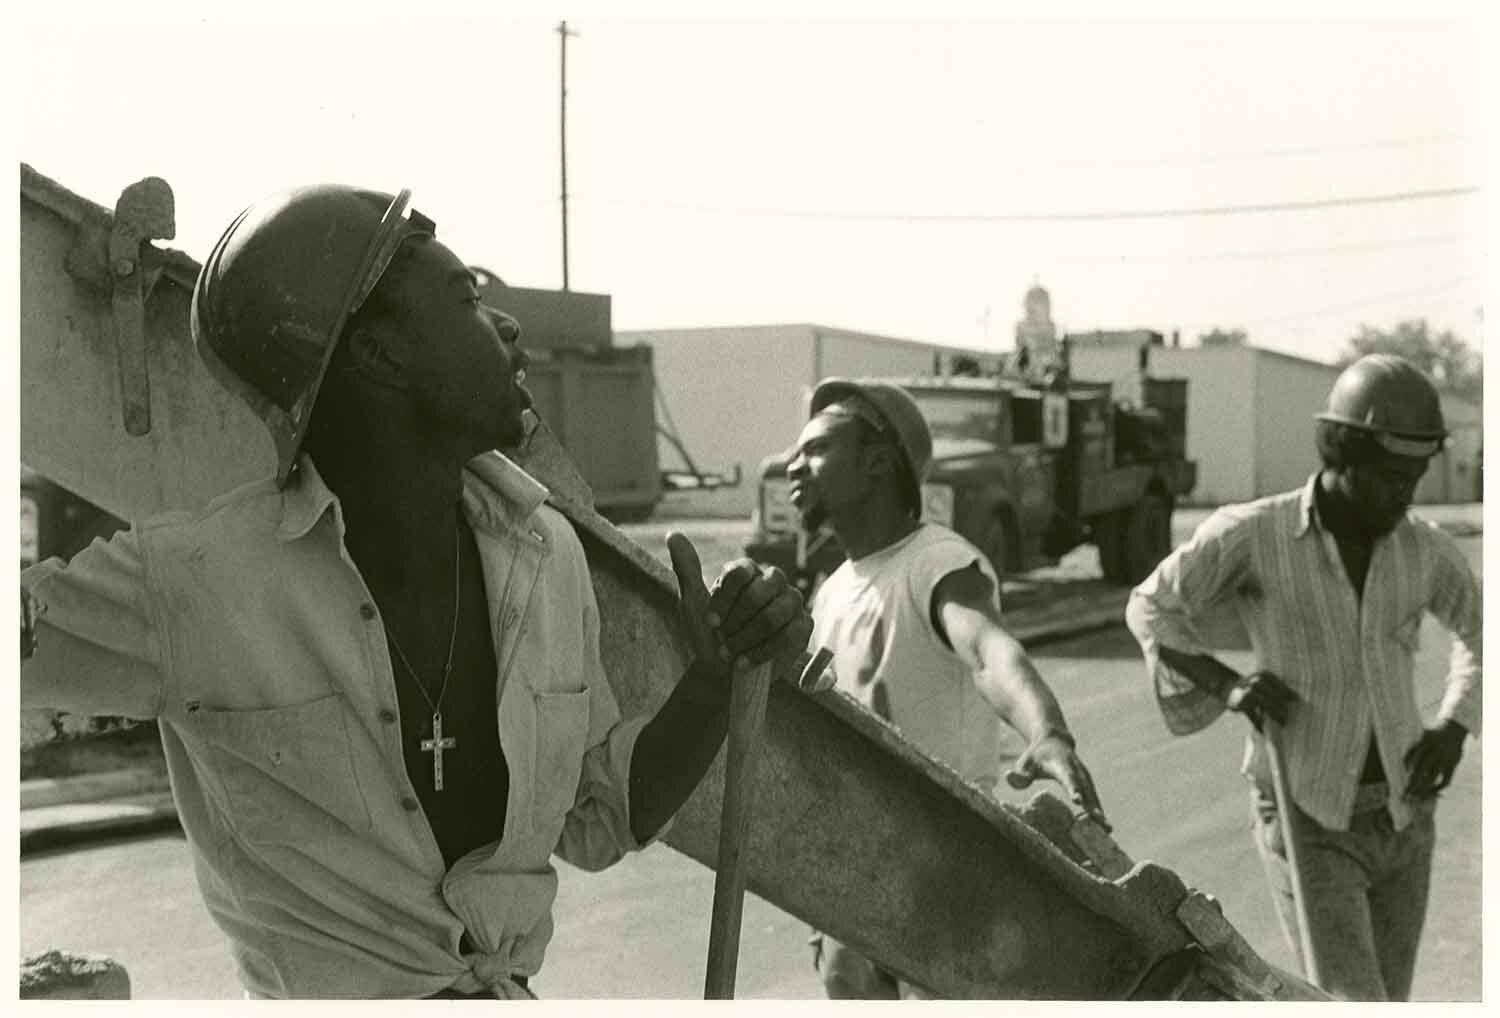   Construction workers repairing the street , 1976 Silver Gelatin Print 7 1/4 × 10 7/8 in. (image size) The Do Good Fund, Inc., 2015-67 